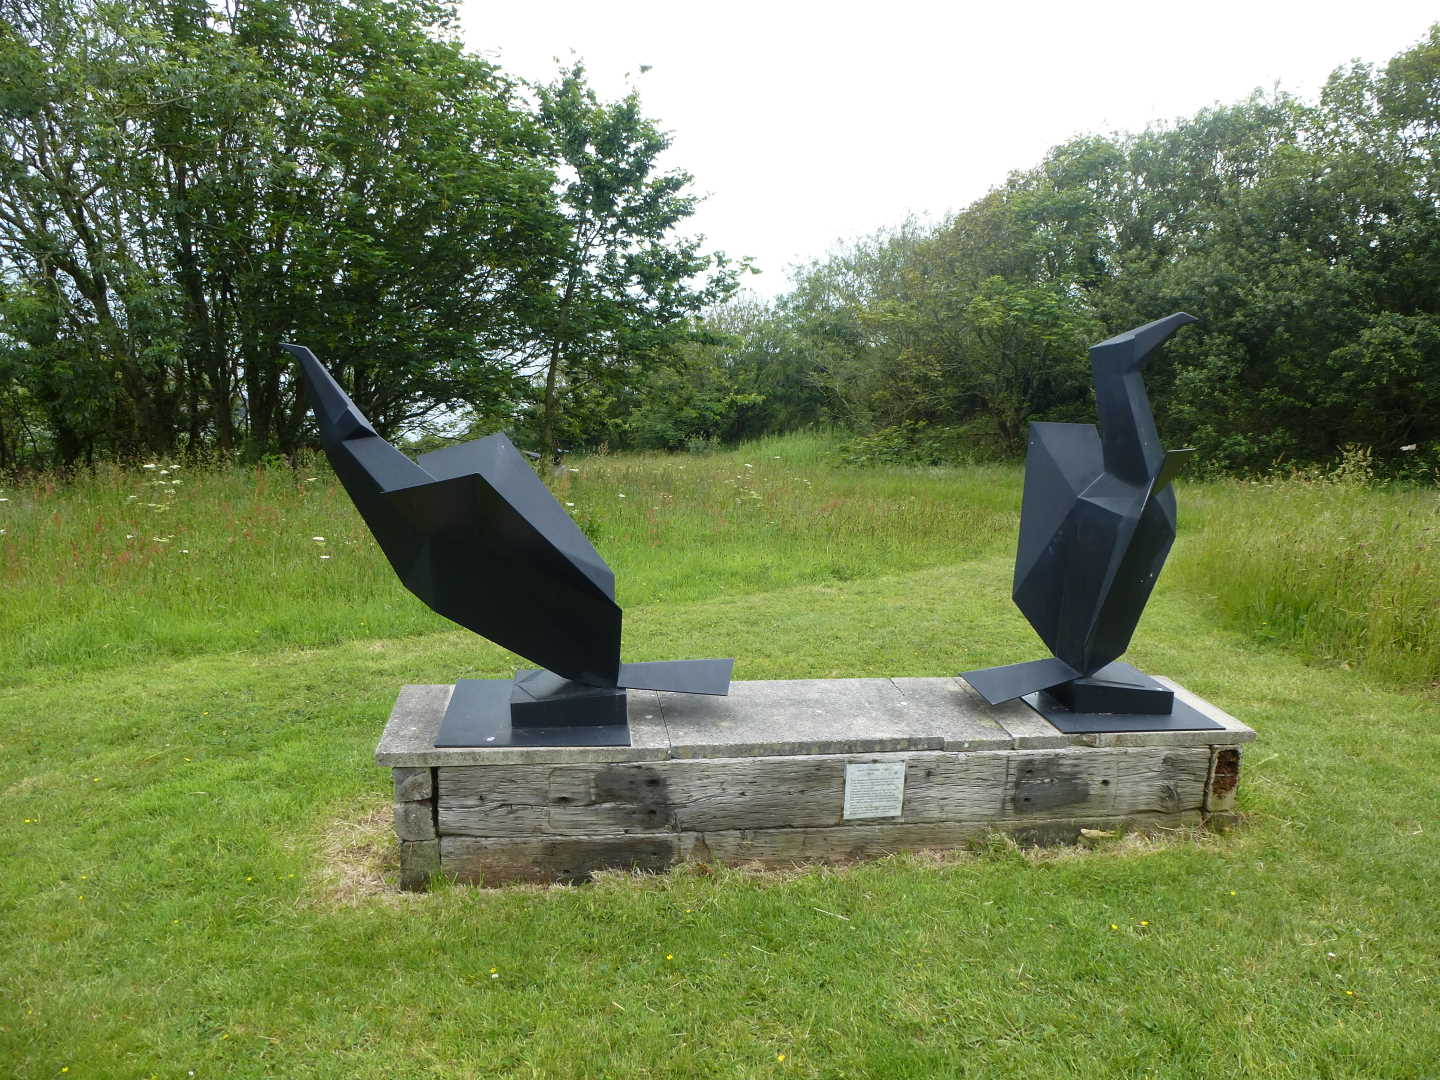 A modern sculpture consisting of two bird like figures